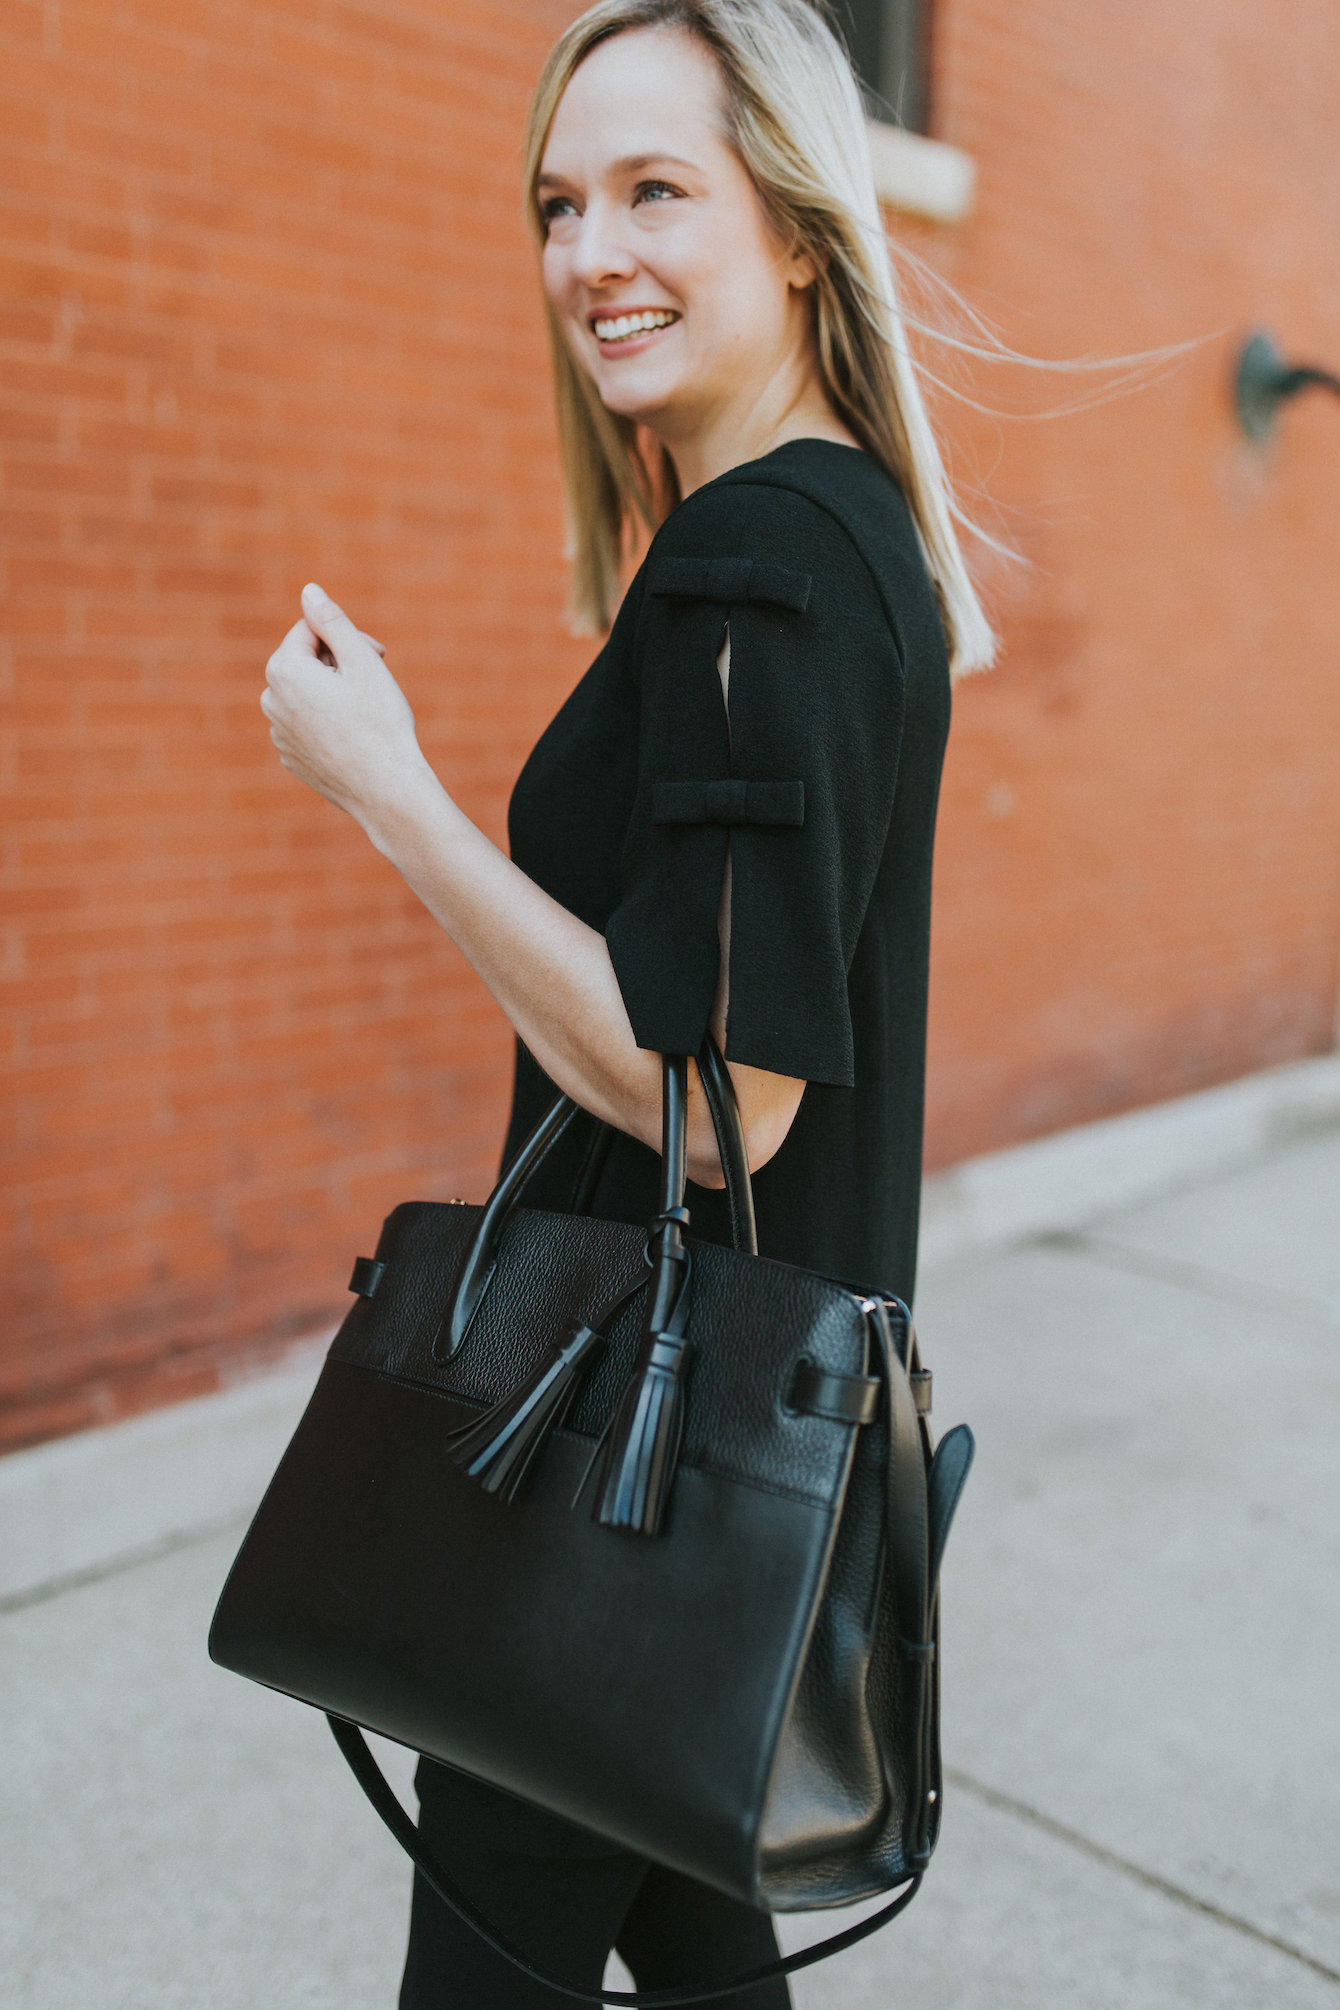 Workwear Wednesday: Little Black (Bow) Dress | Charmingly Styled